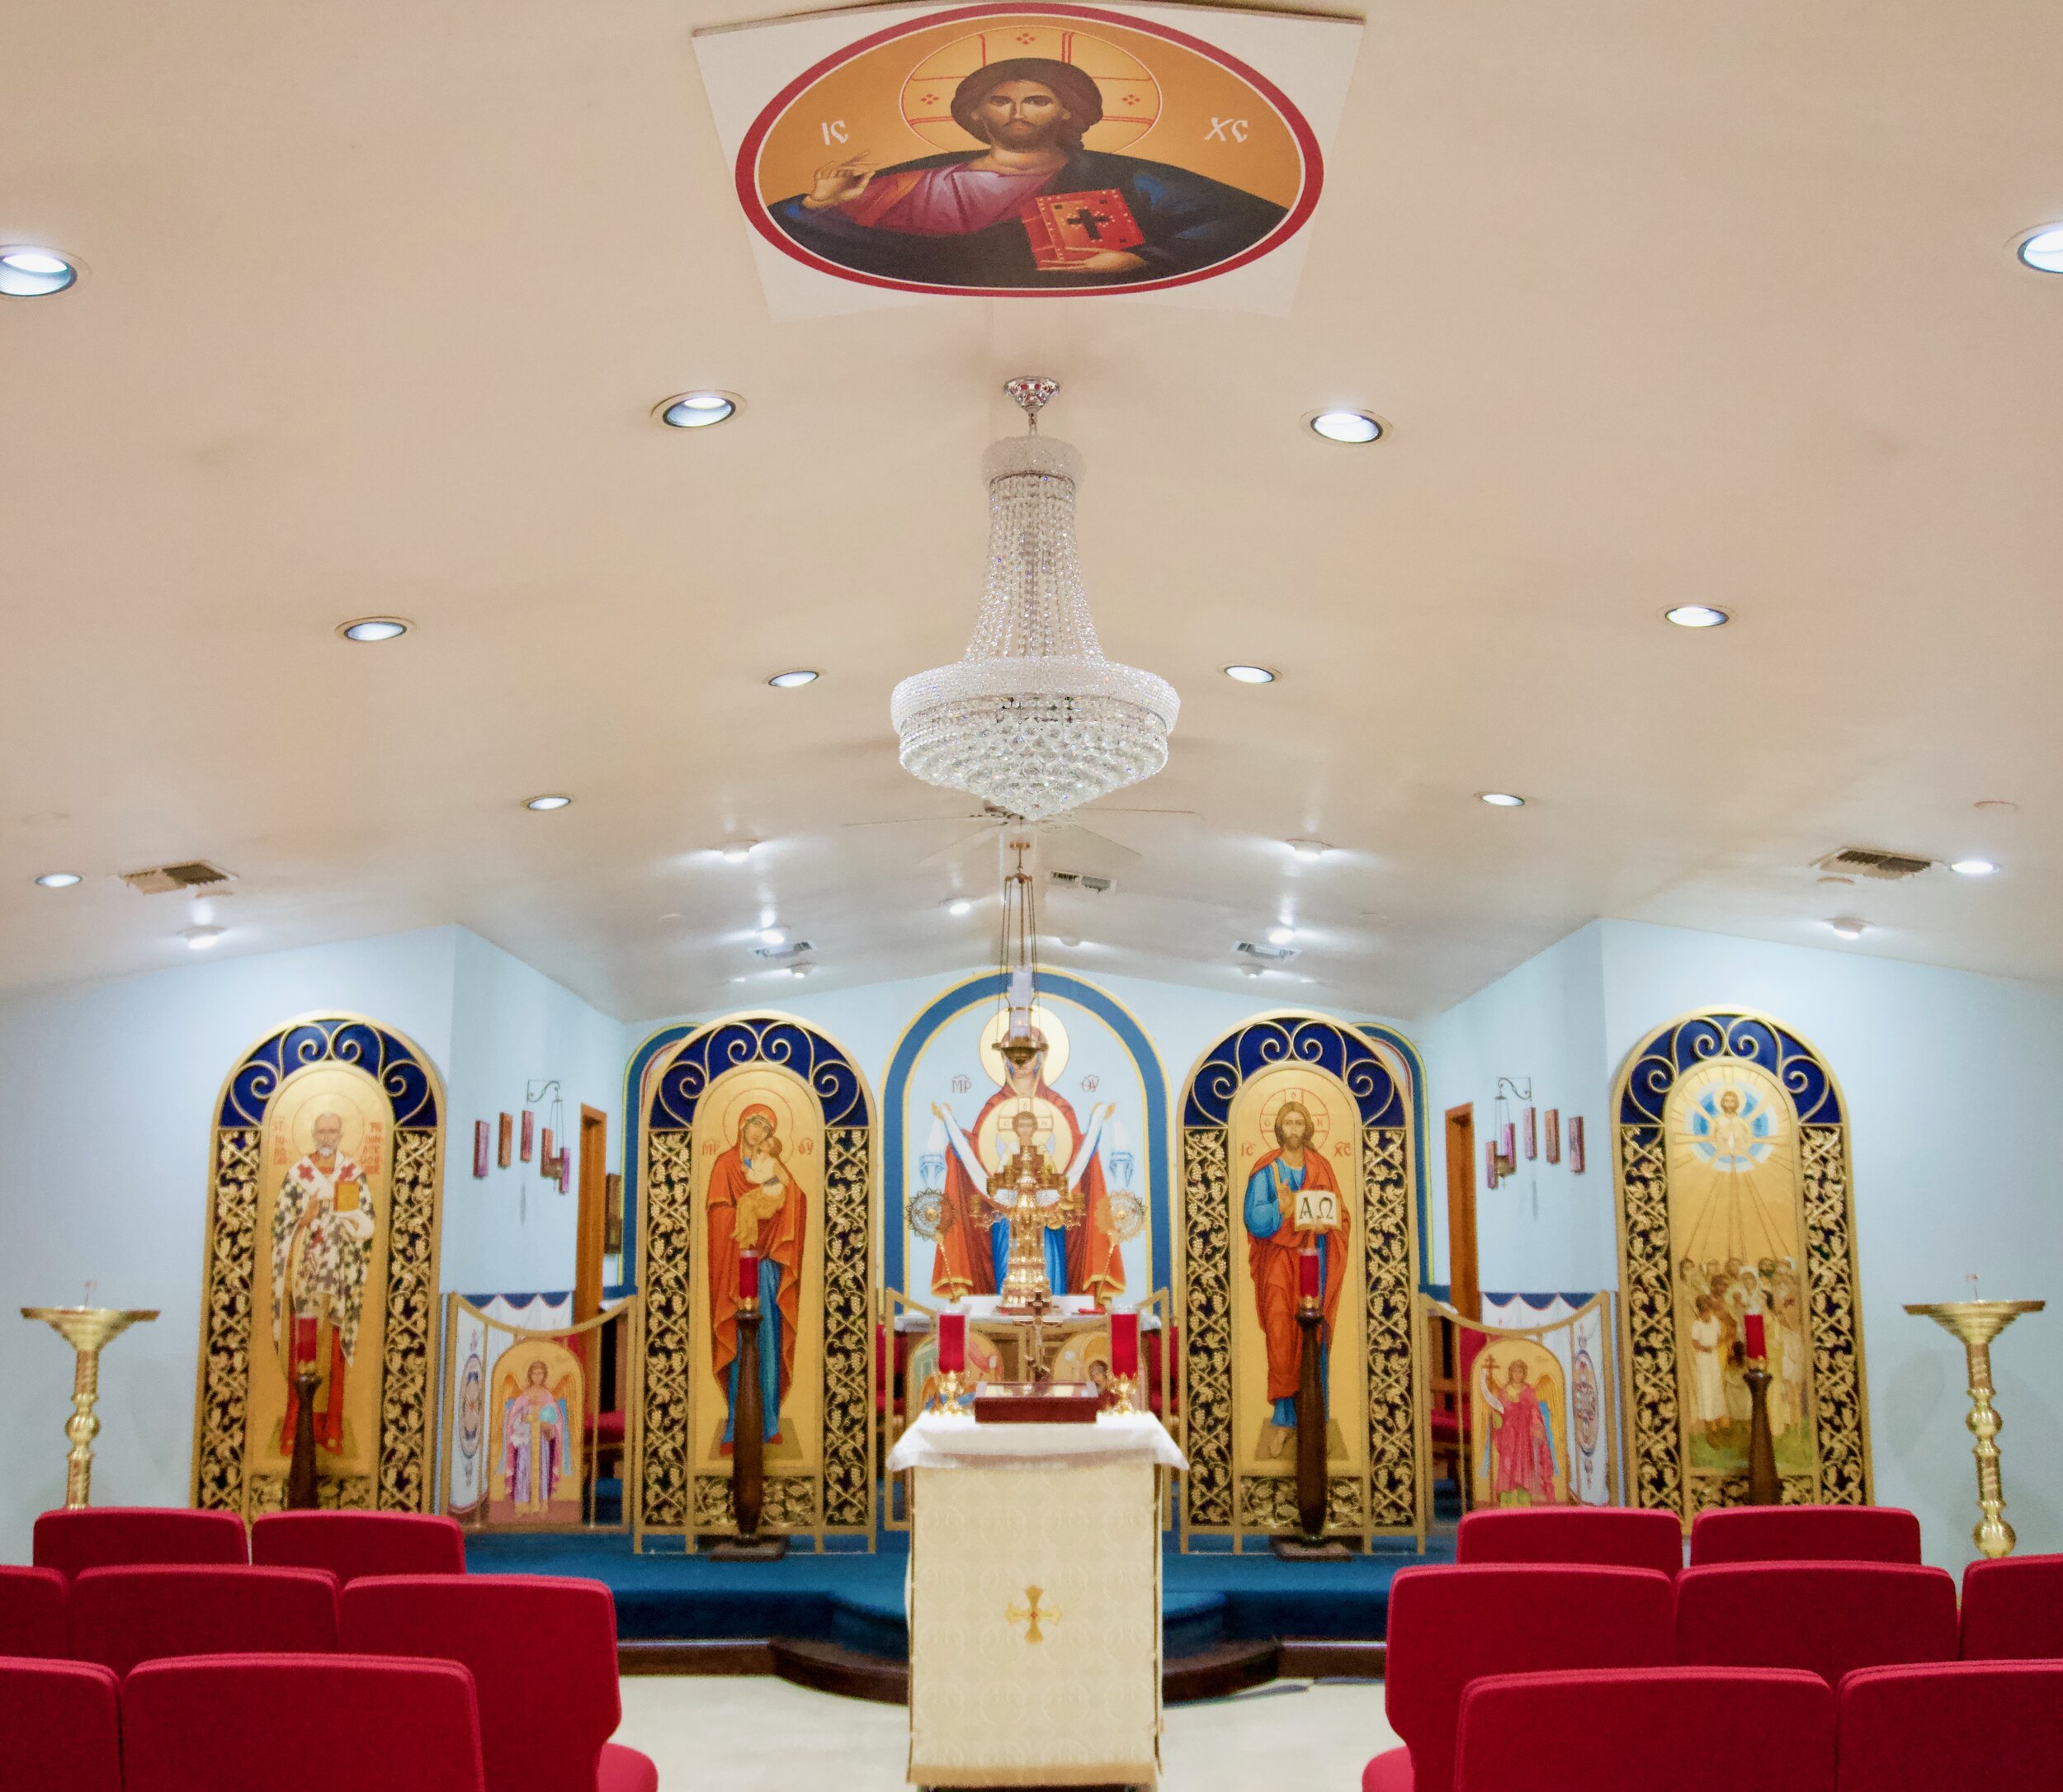 Inside Interiors Of Small Generic Church. Doors, Windows, Wooden Benches,  Stone Tiles Floor And Arches Of Generic Village Catholic Church. Stock  Photo, Picture And Royalty Free Image. Image 88009384.